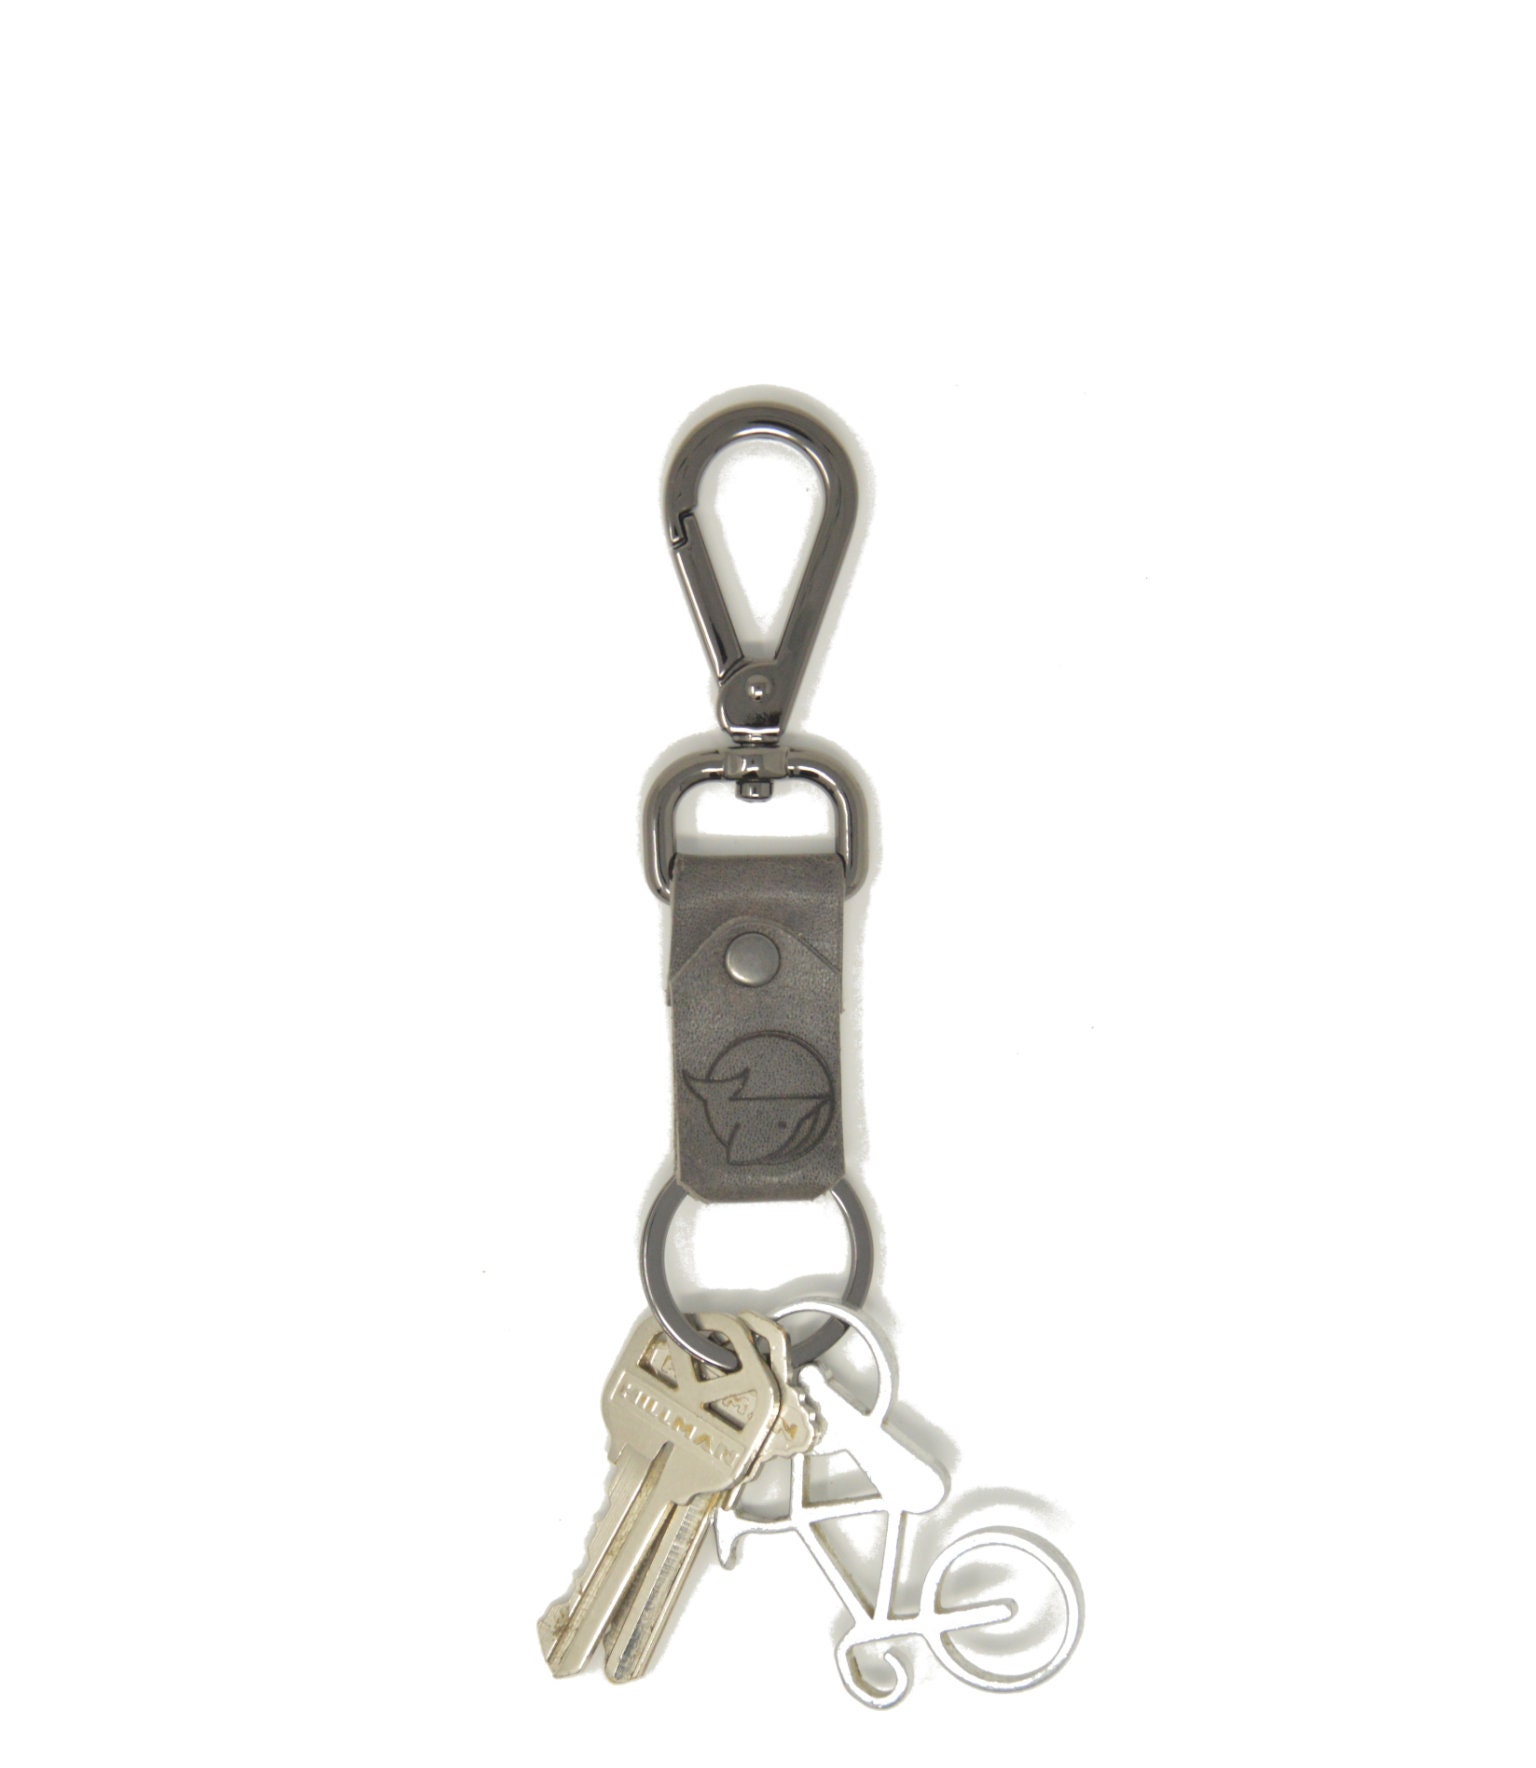  9 Pcs swivel snap Bolt Keychain clips Keychain hooks.  Lightweight & Durable clasp with hook for Keys, Key Chains, Tags and  Lanyards.Plastic Spring keychain clasp come with key rings. : Home